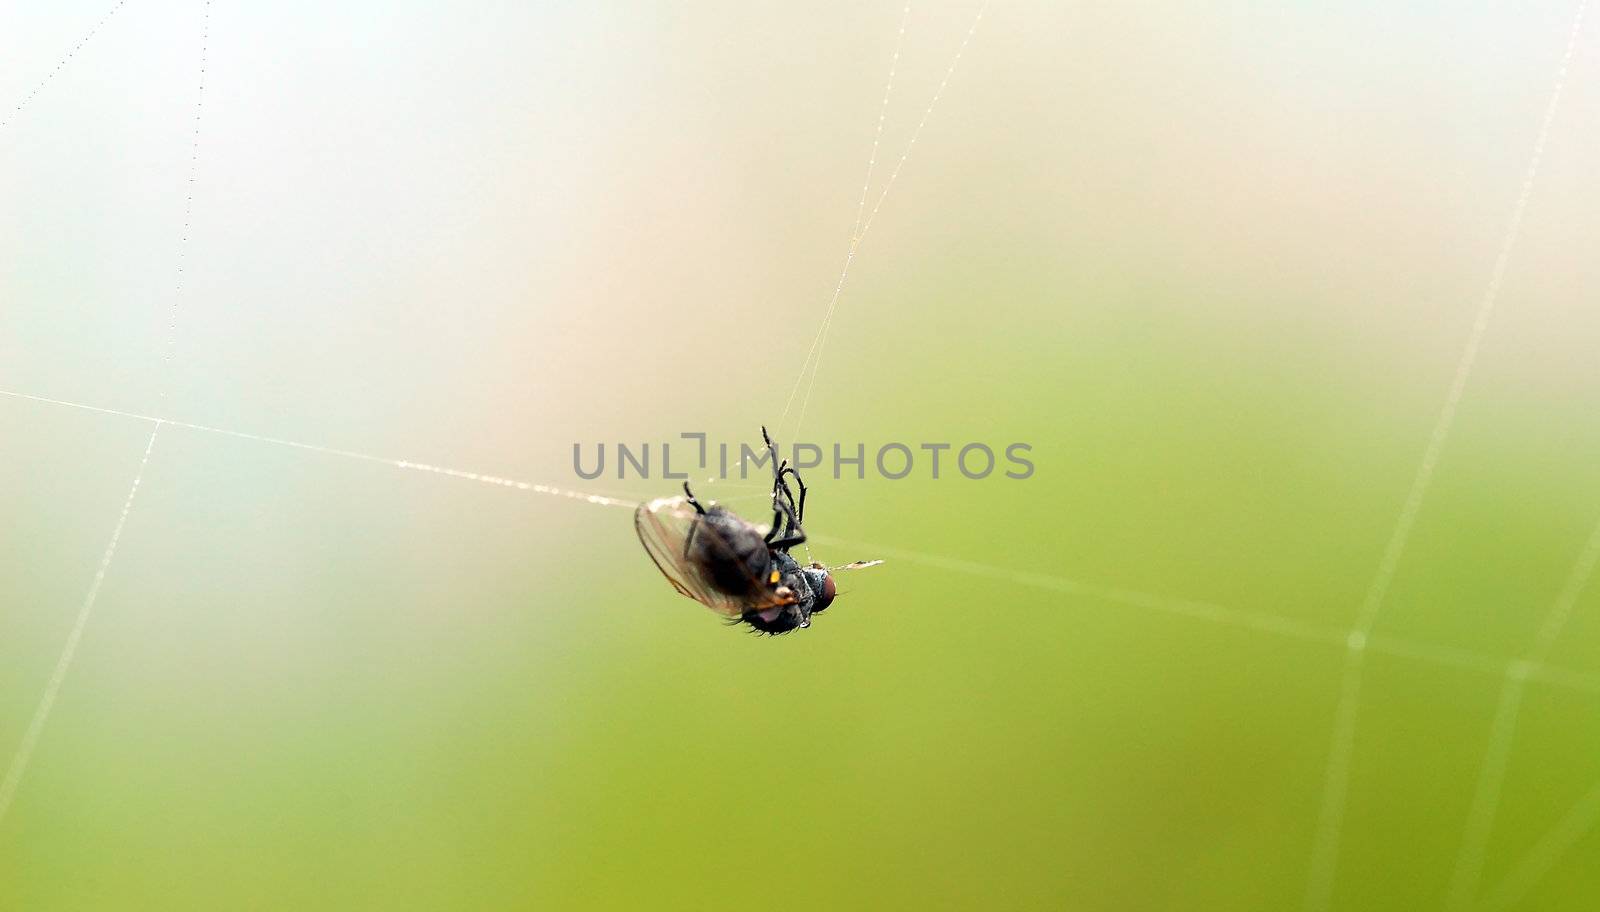 A fly caught in a spider web